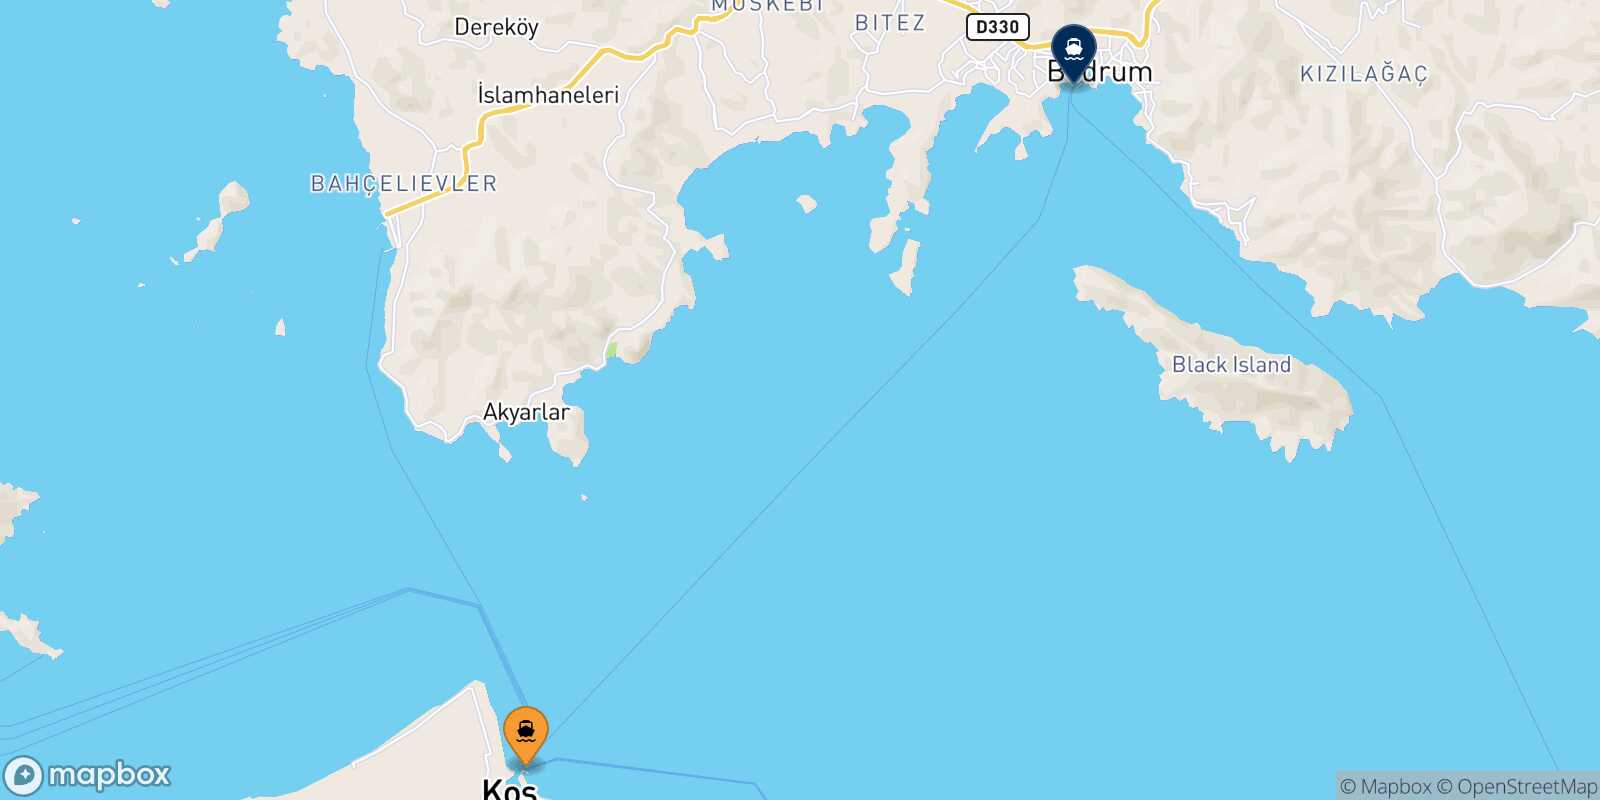 Kos Bodrum route map